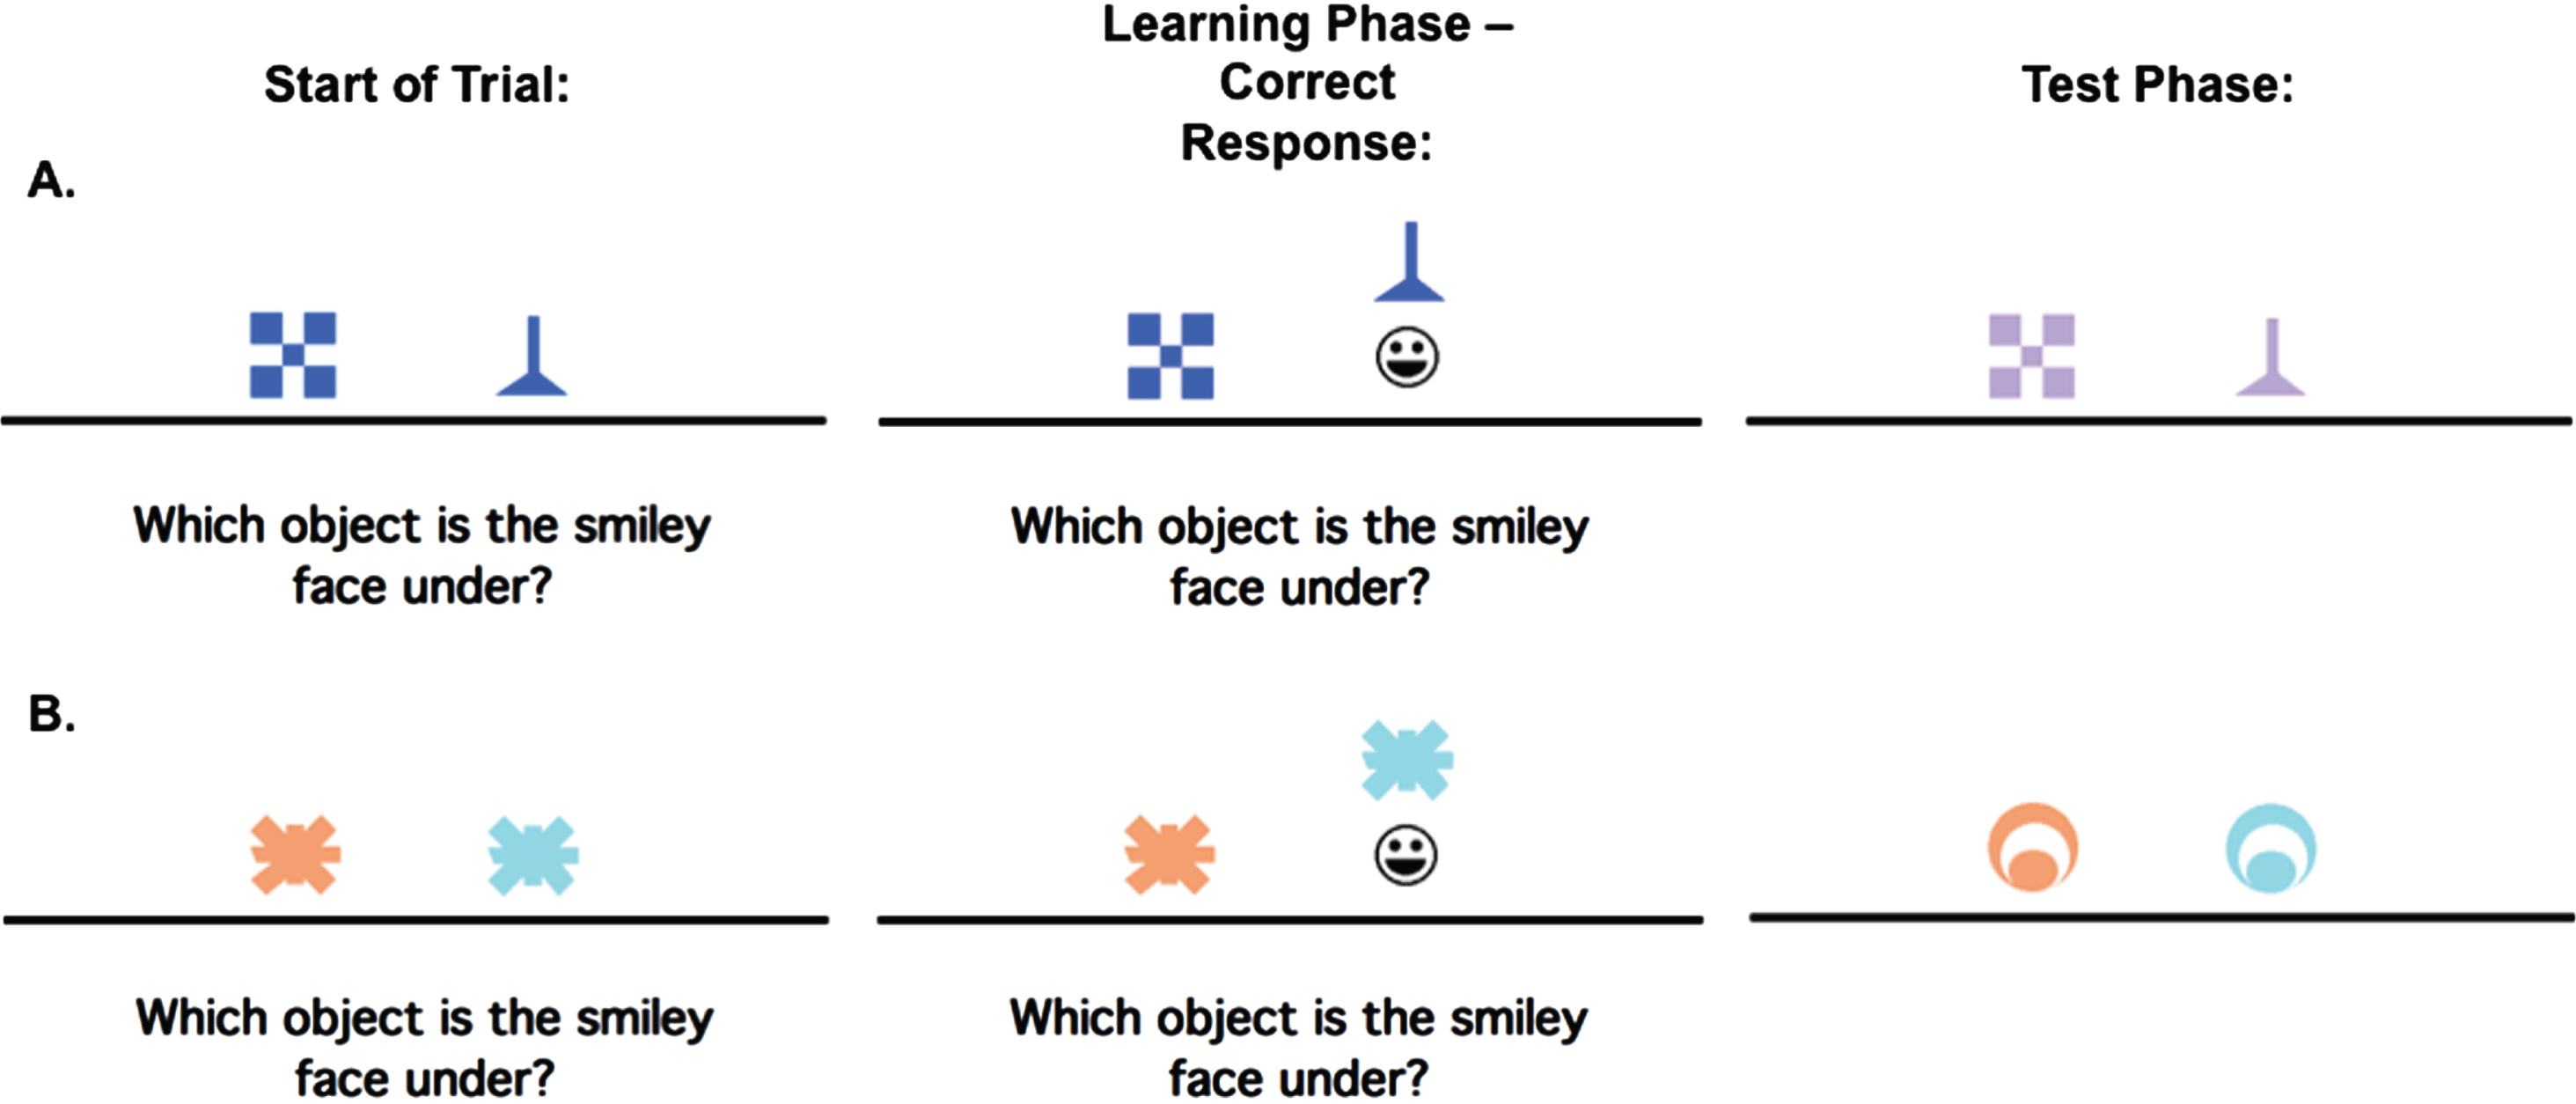 An example of the concurrent discrimination and generalization task. On each trial of initial learning (acquisition), the discrimination pair is presented and if the participant responds correctly, the chosen object is raised to reveal a smiley face icon underneath. During test phase (generalization), events are similar to the acquisition phase, but the objects are changed so that the relevant feature remains the same, but the irrelevant feature is novel. Here (A) is an example of a trial where the relevant feature is shape, but not color, while (B) is an example of a trial where the relevant feature is color, but not shape.